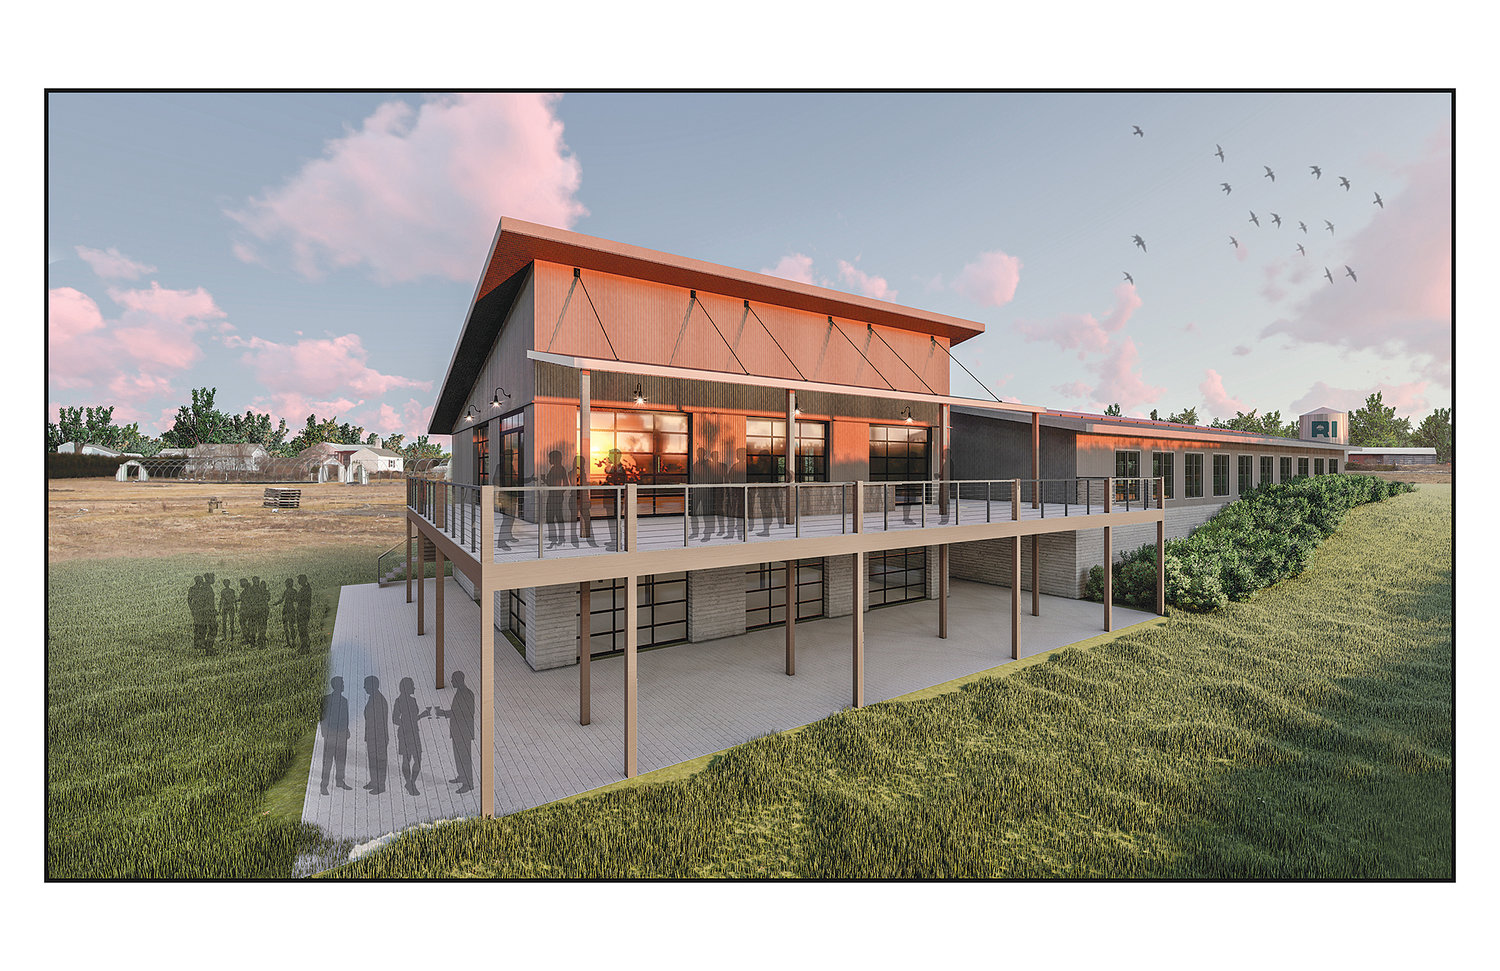 Architectural rendering of the 9,335-square-foot building Ragged Island Brewing Co. has proposed for the site of its planned farm brewery off Bristol Ferry Road. The new building would house the business’ brewing operations and also a seasonal taproom. A year-round taproom and retail operation would be located in the main farmhouse building, home of the former Island Garden Shop.